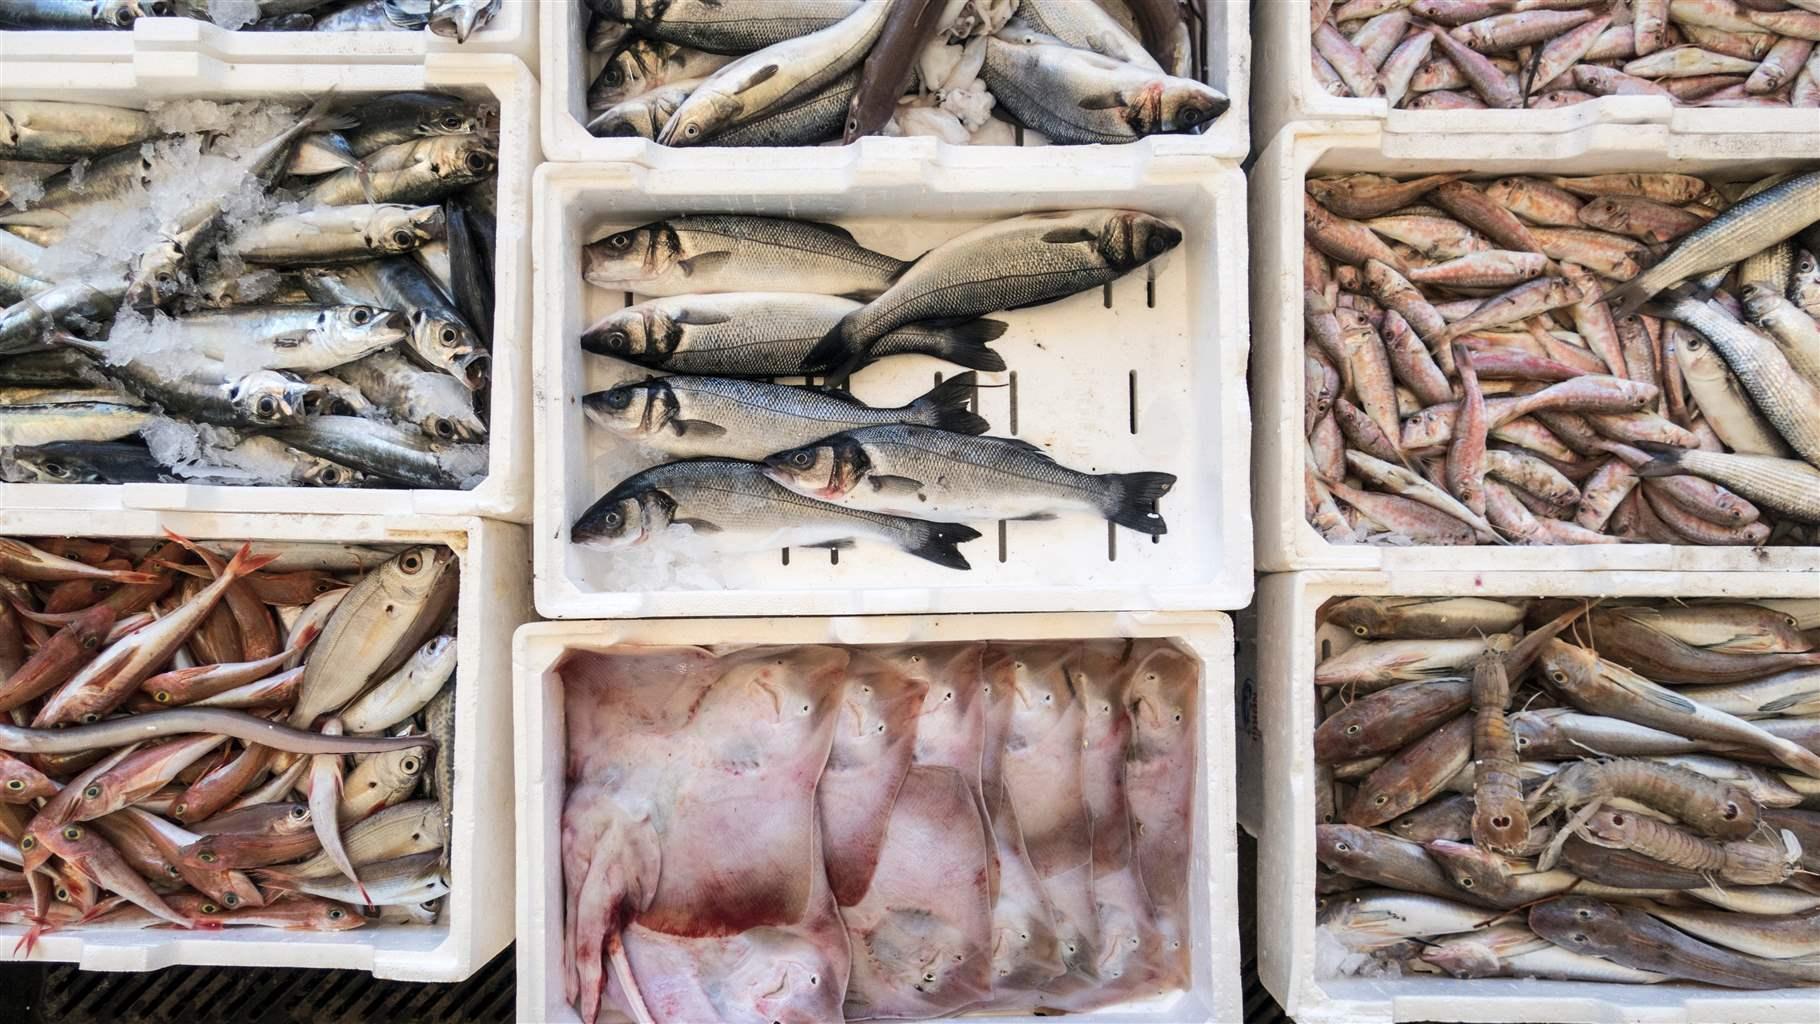 Six types of fish in shallow white bins are viewed from above. 